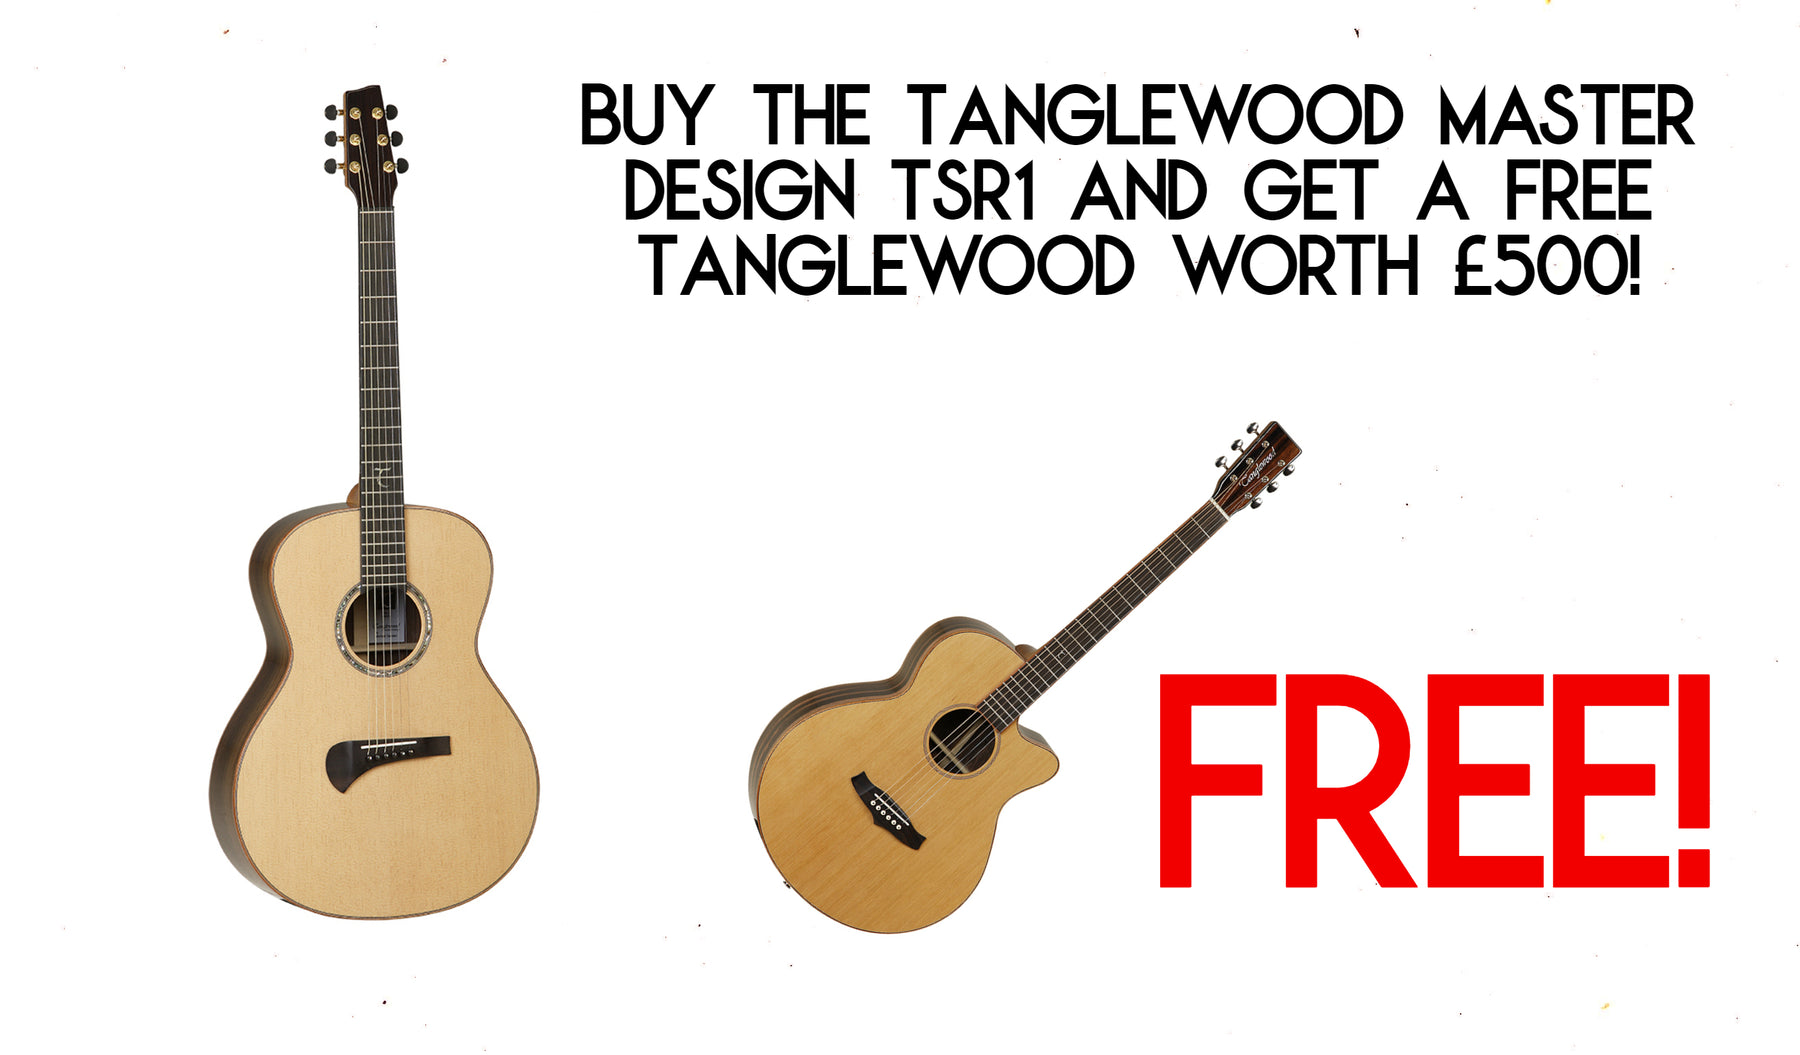 Buy a Tanglewood Master design and get a FREE guitar worth £500!